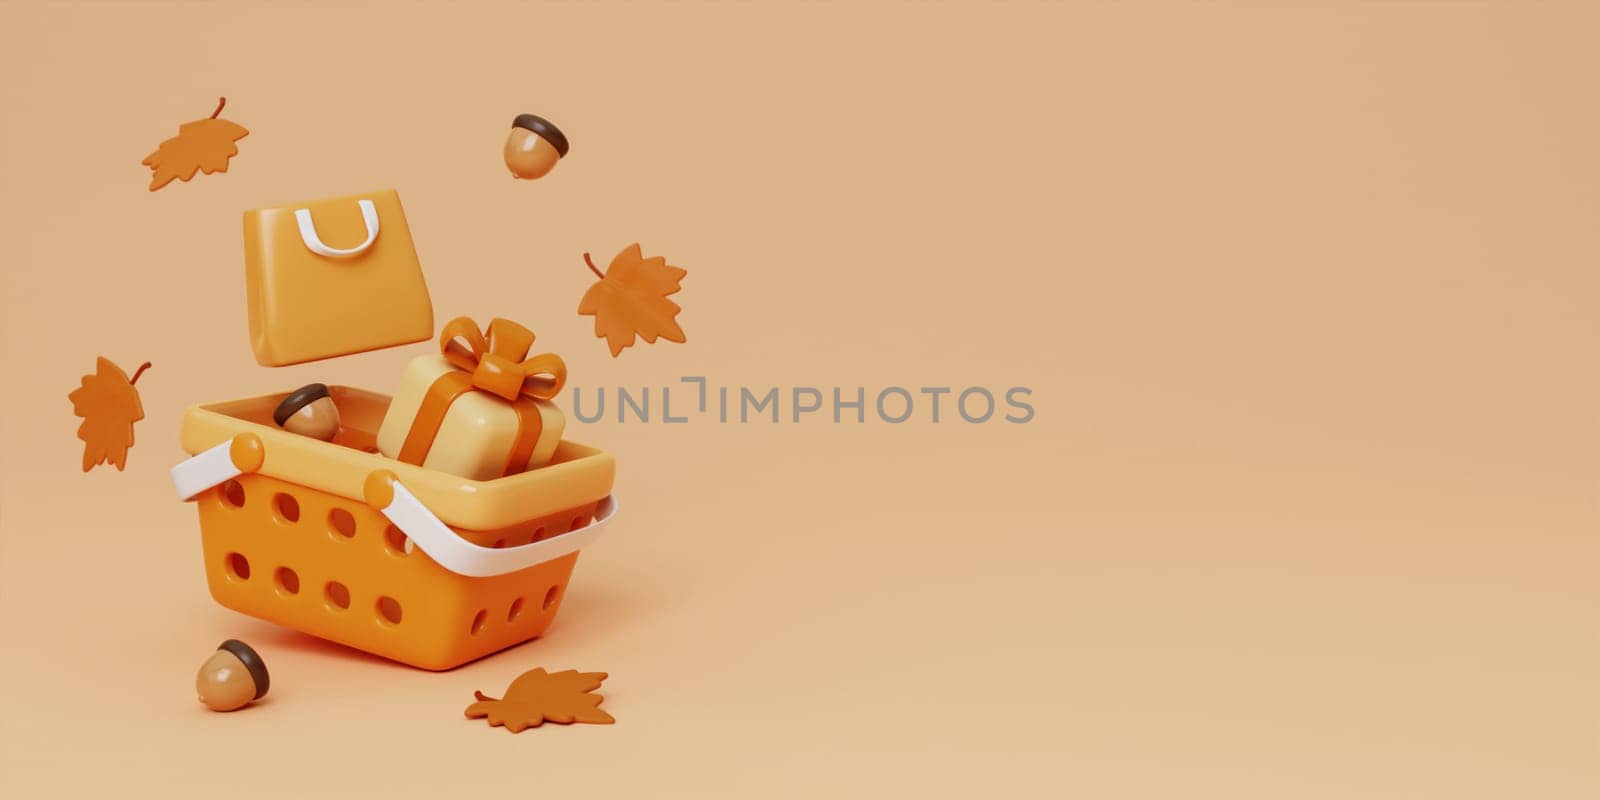 Autumn sale decoration background with basket shopping cart, gift box, bag, leaves, copy space text, 3D rendering.